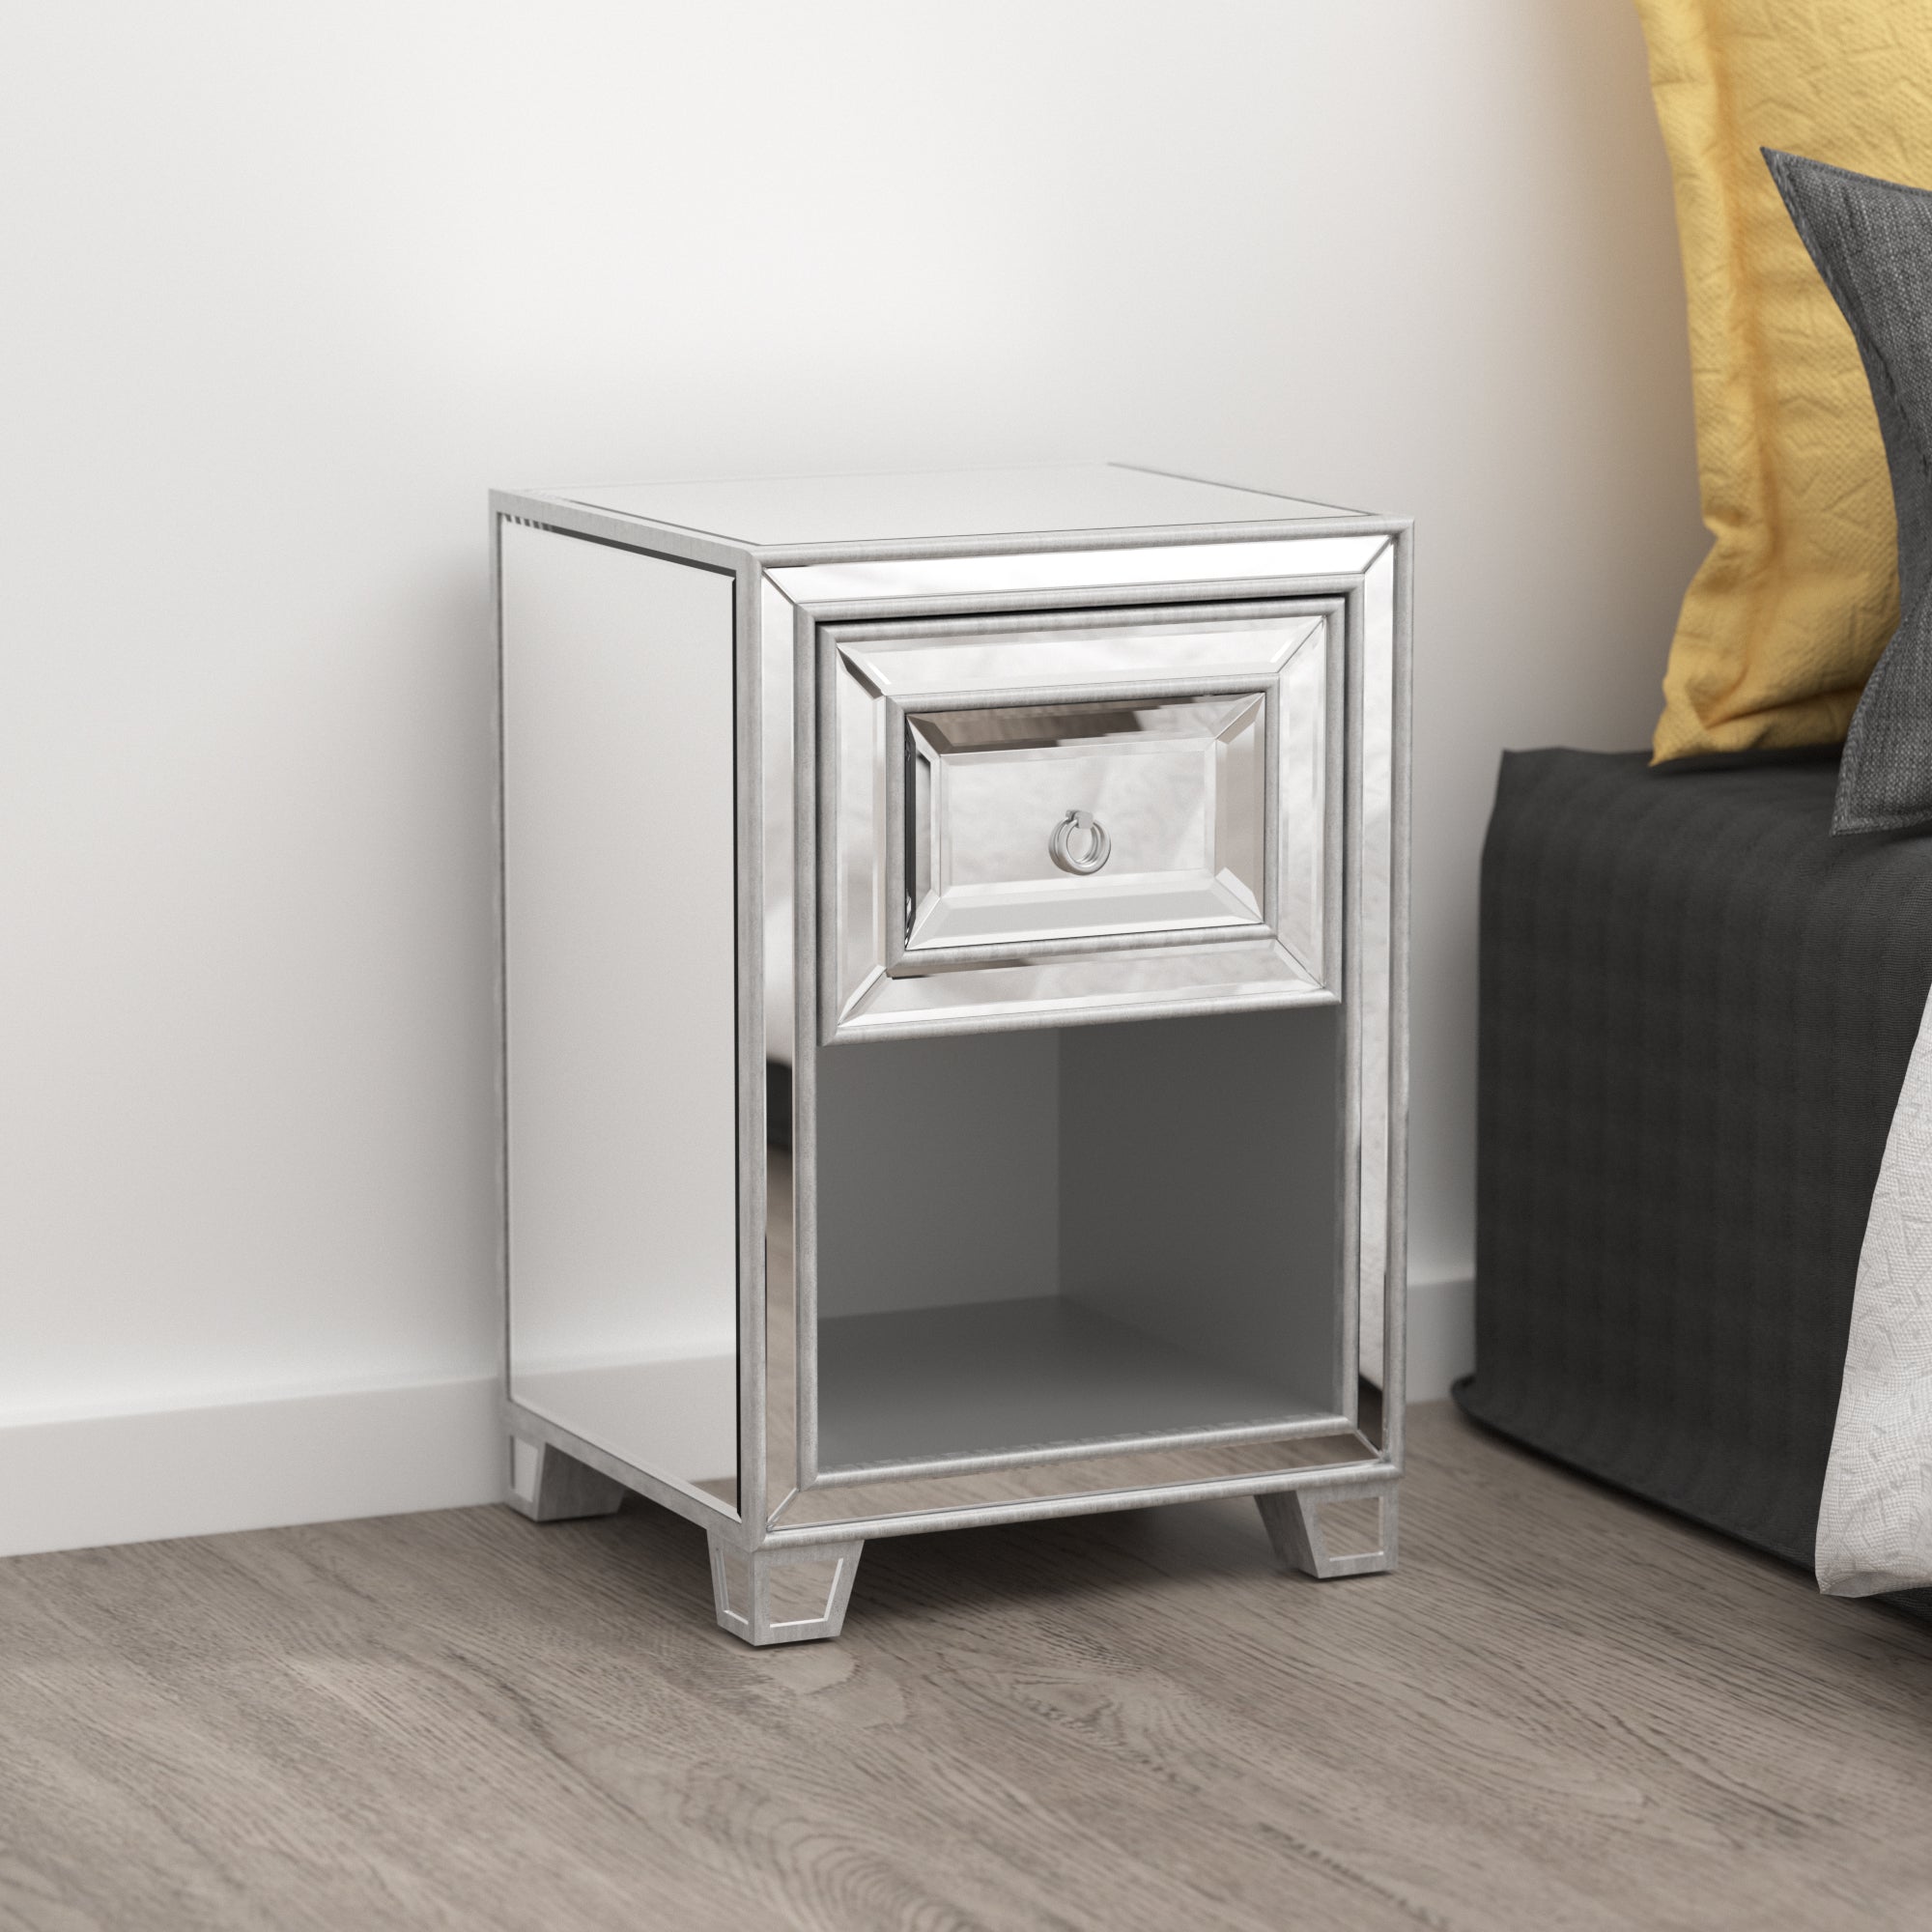 1-Drawer Wood Nightstand with Open Storage